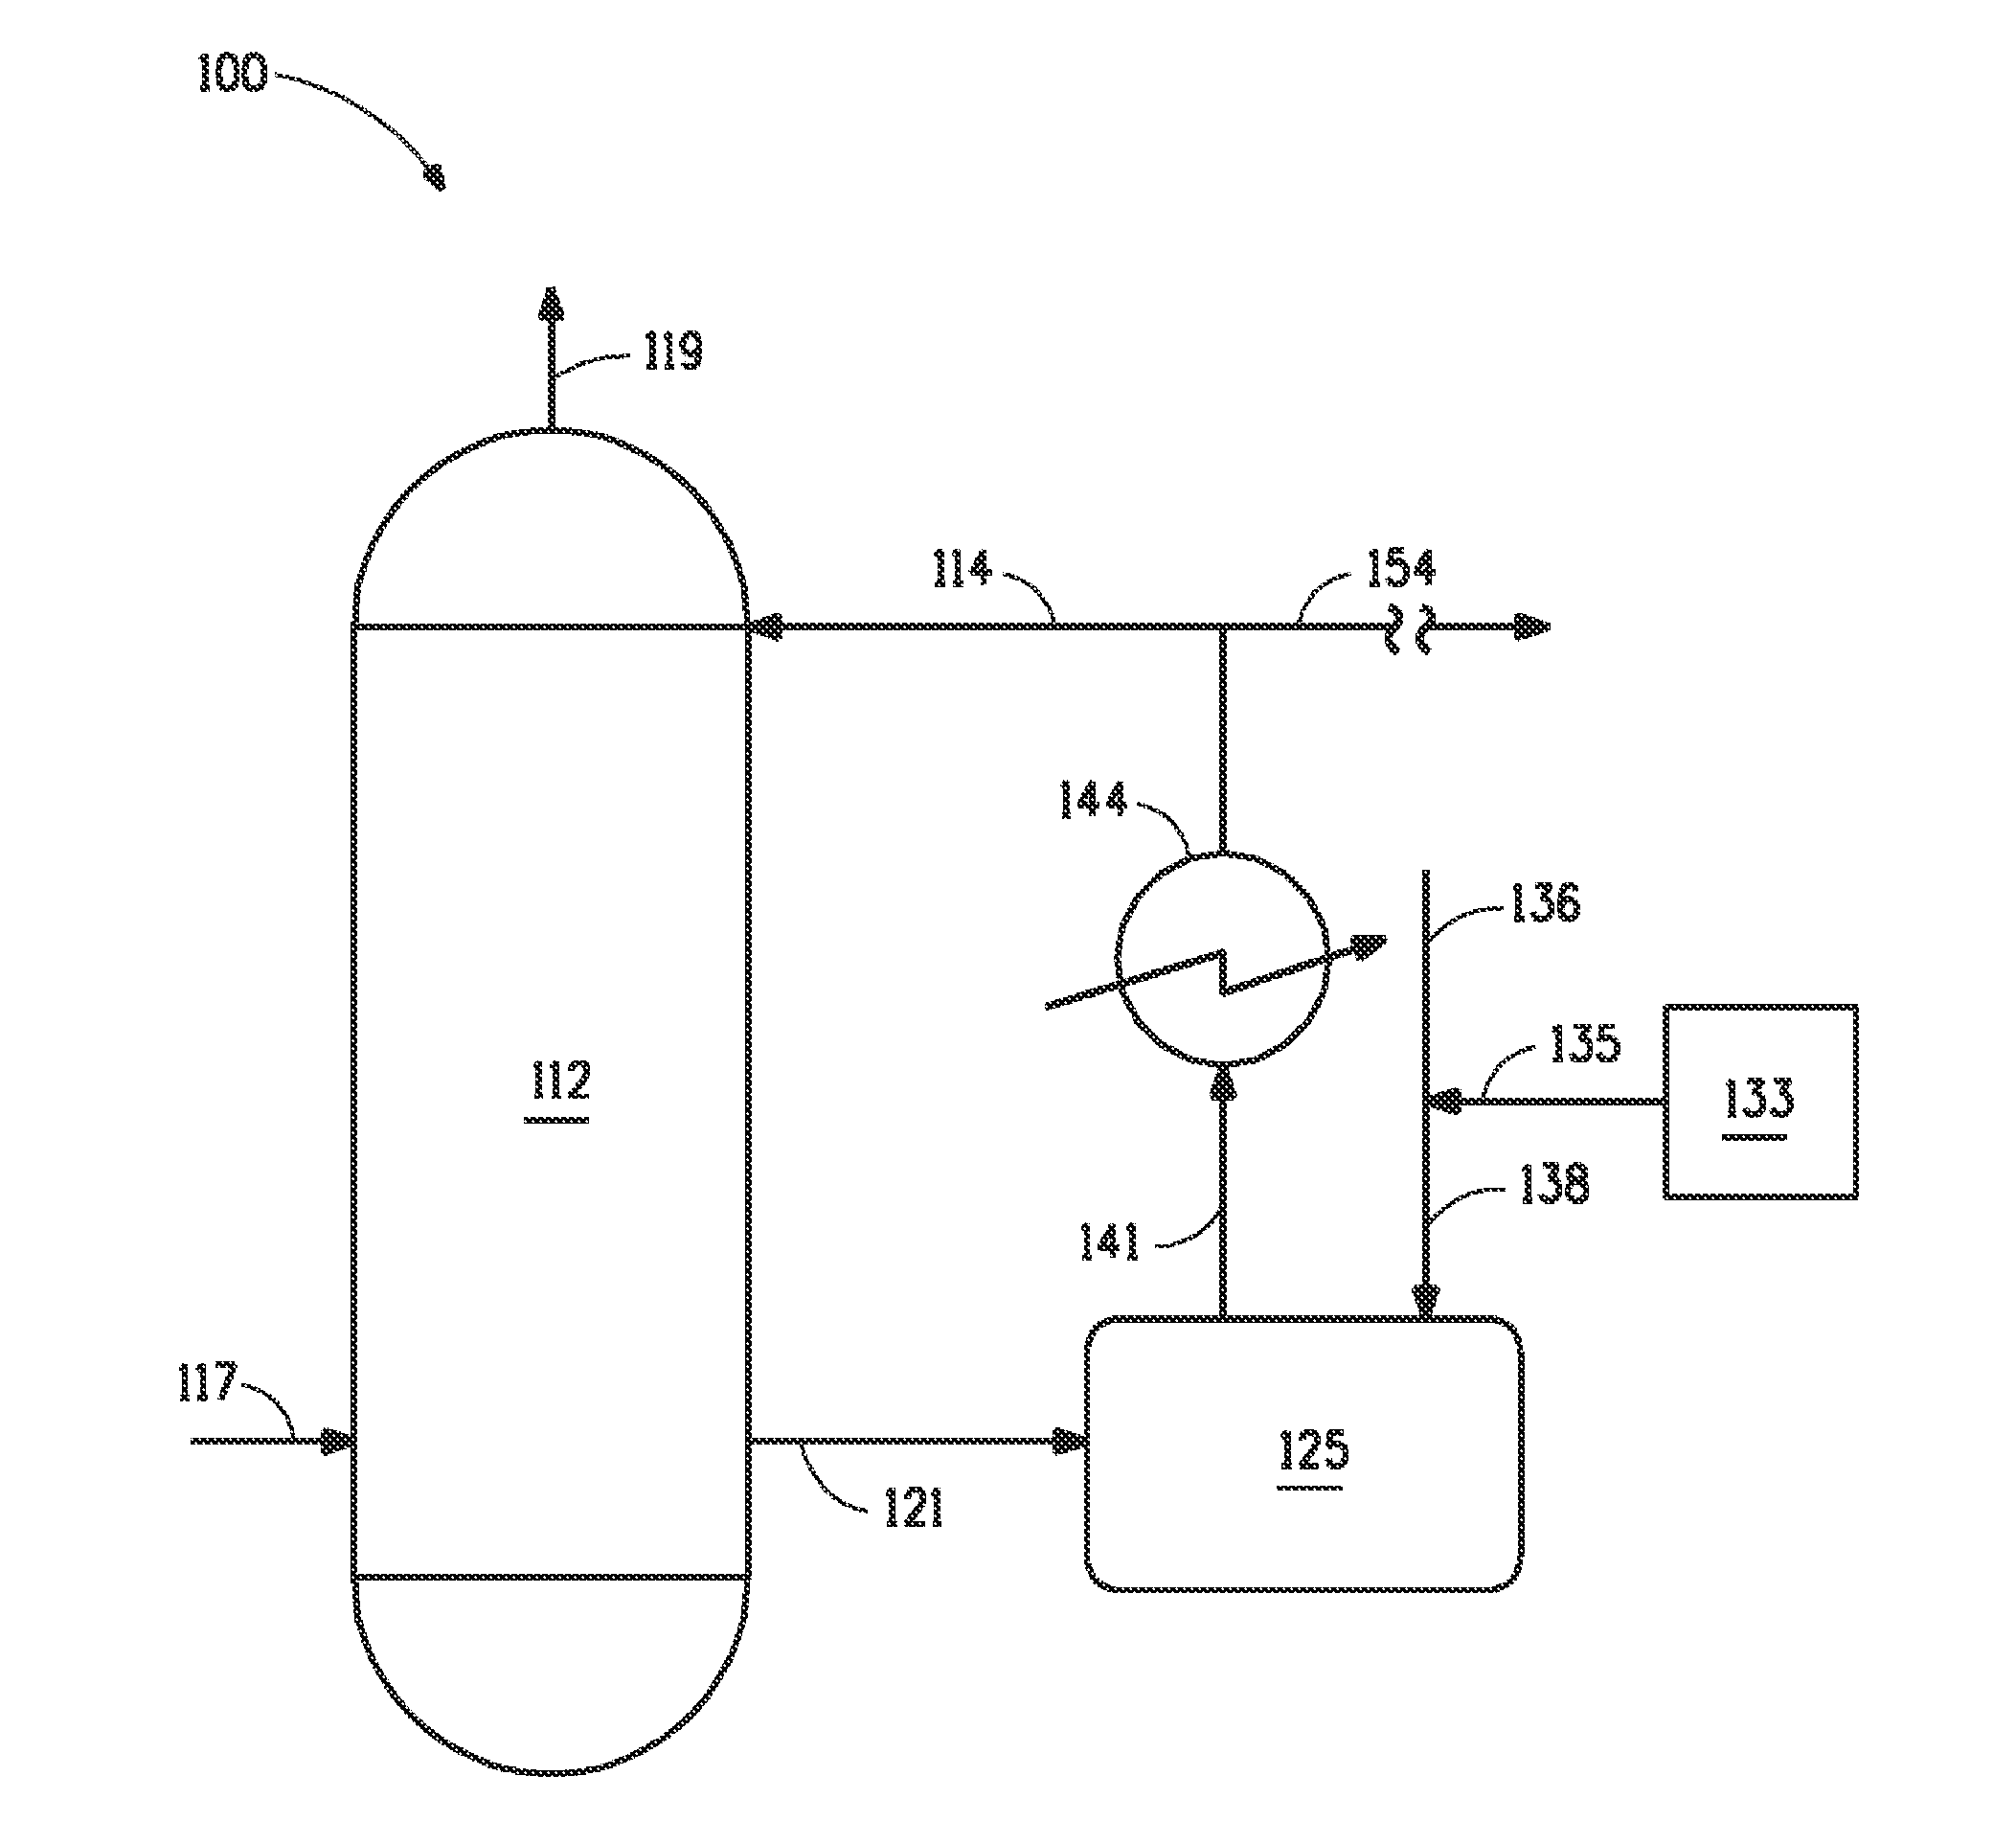 Process for producing sulfuric acid with low levels of nitrogen oxides